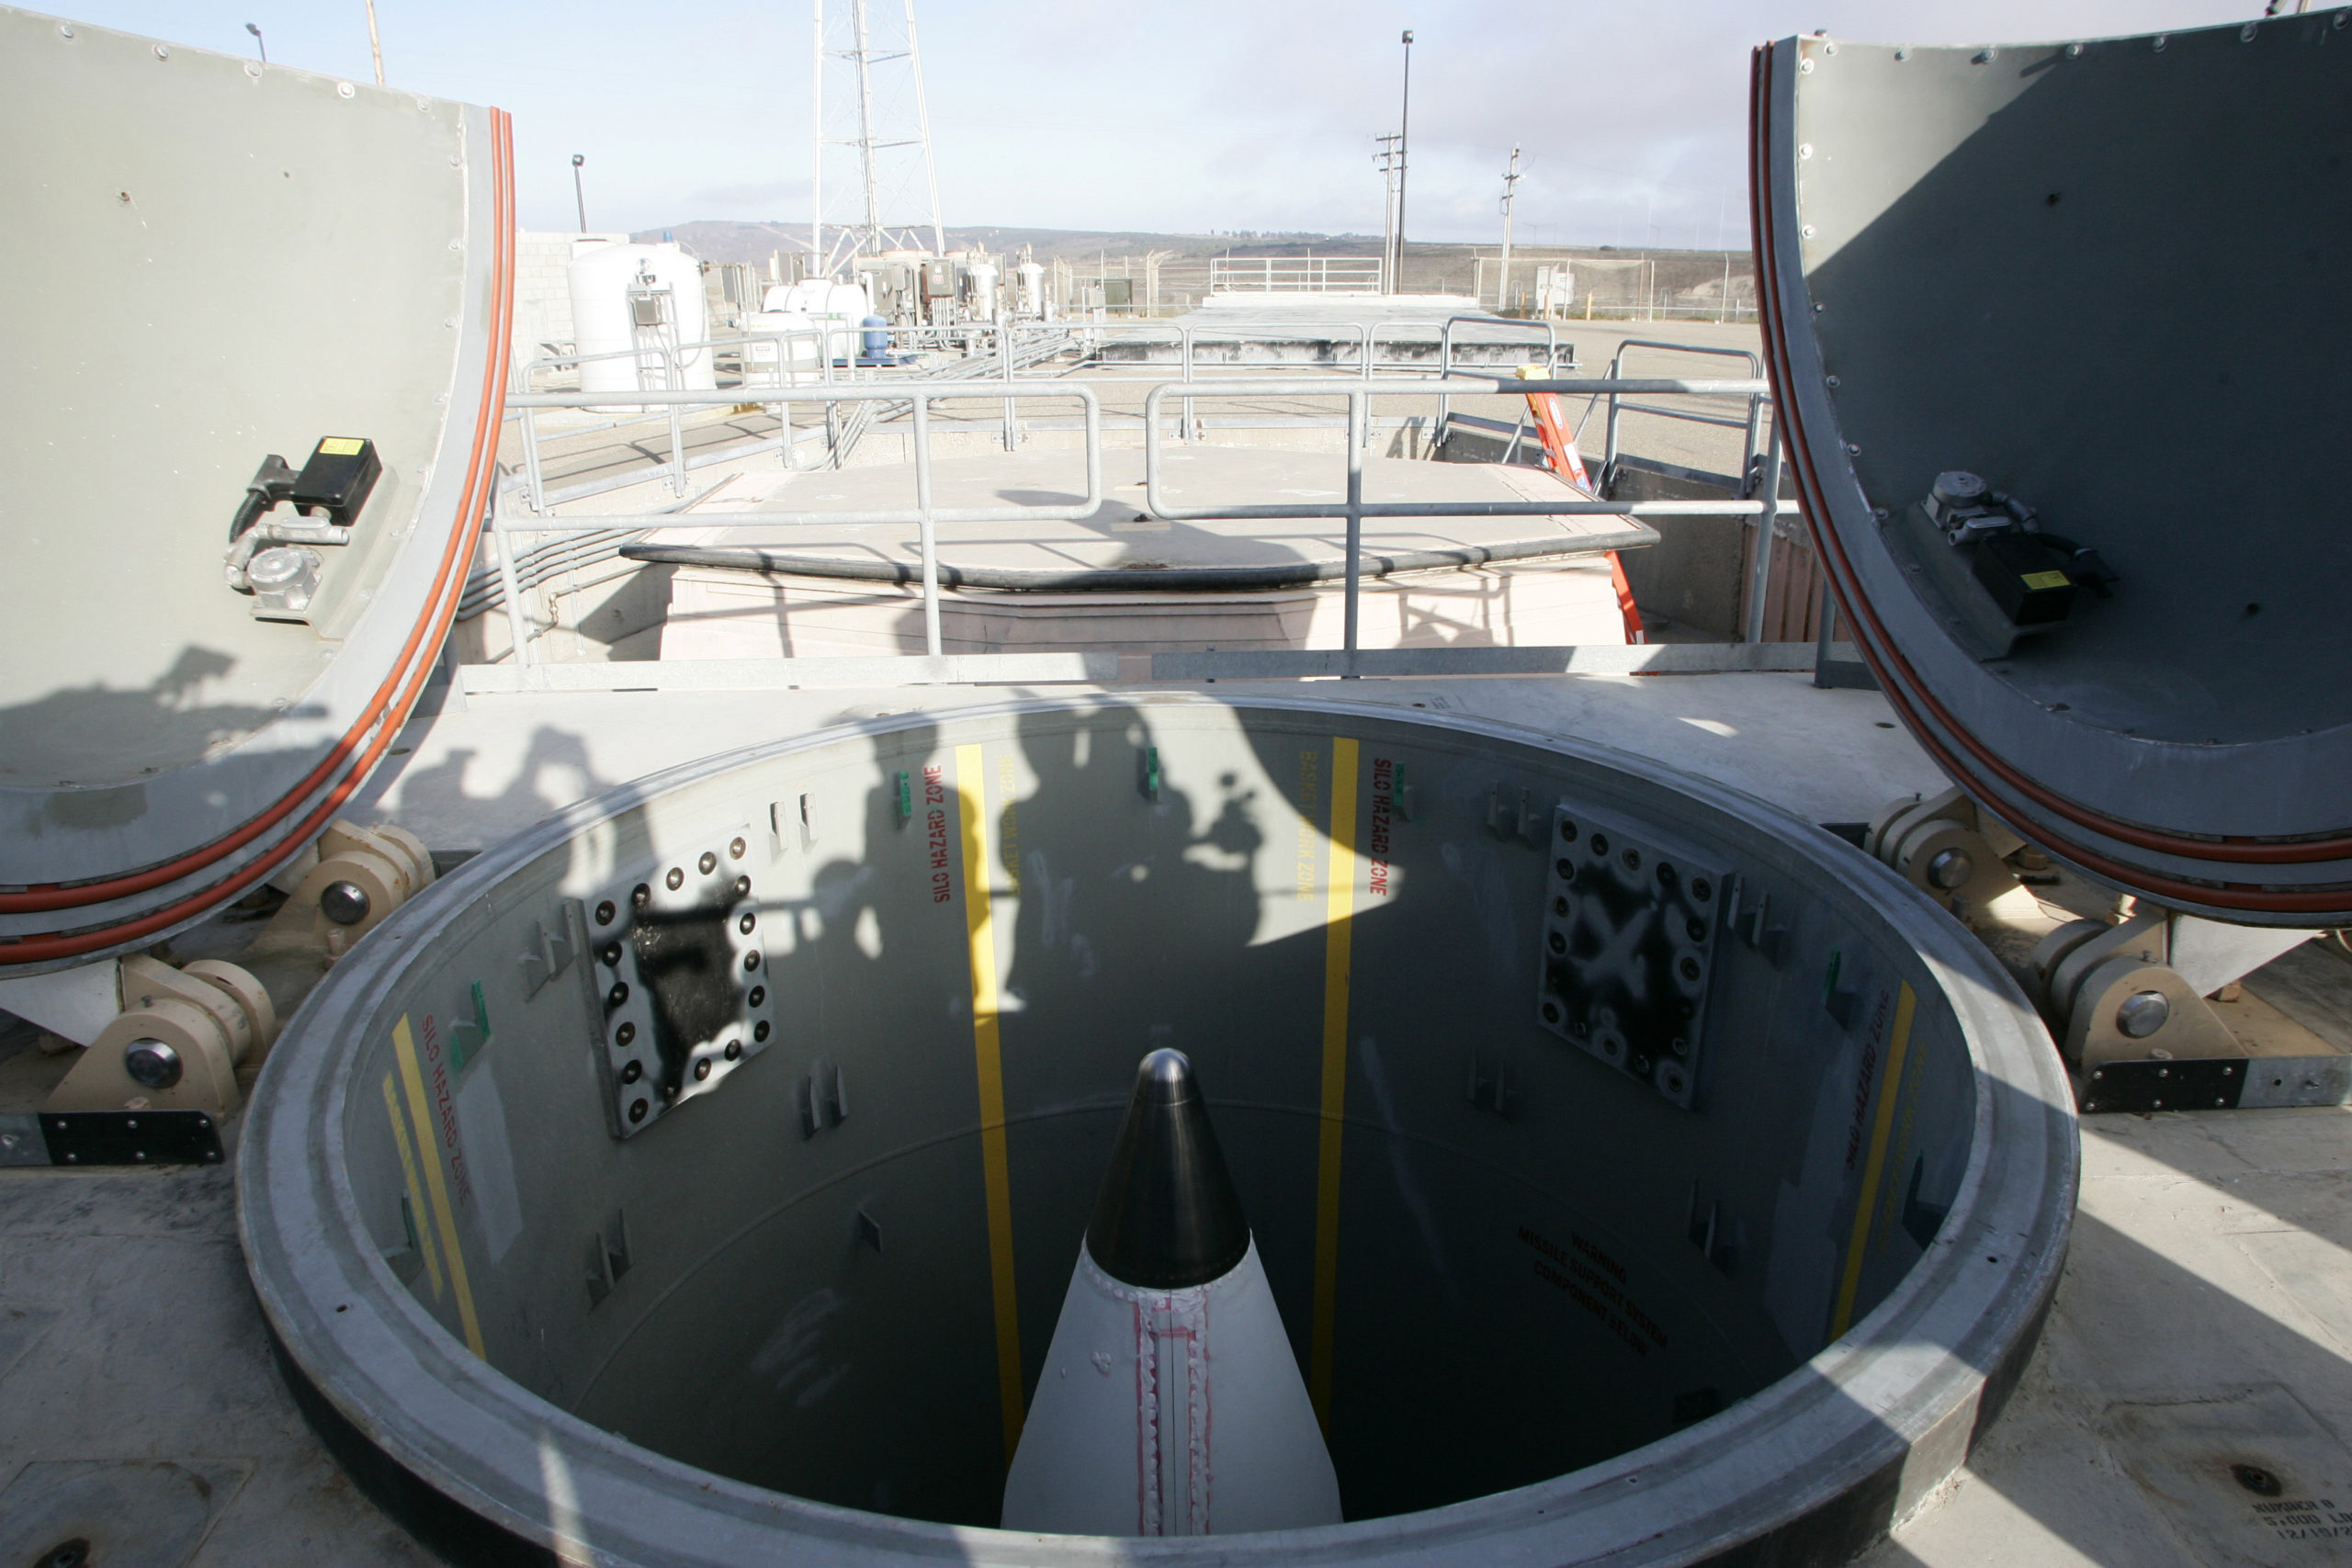 A long-range ground-based missile silo at the Vandenberg Air Force Base in California